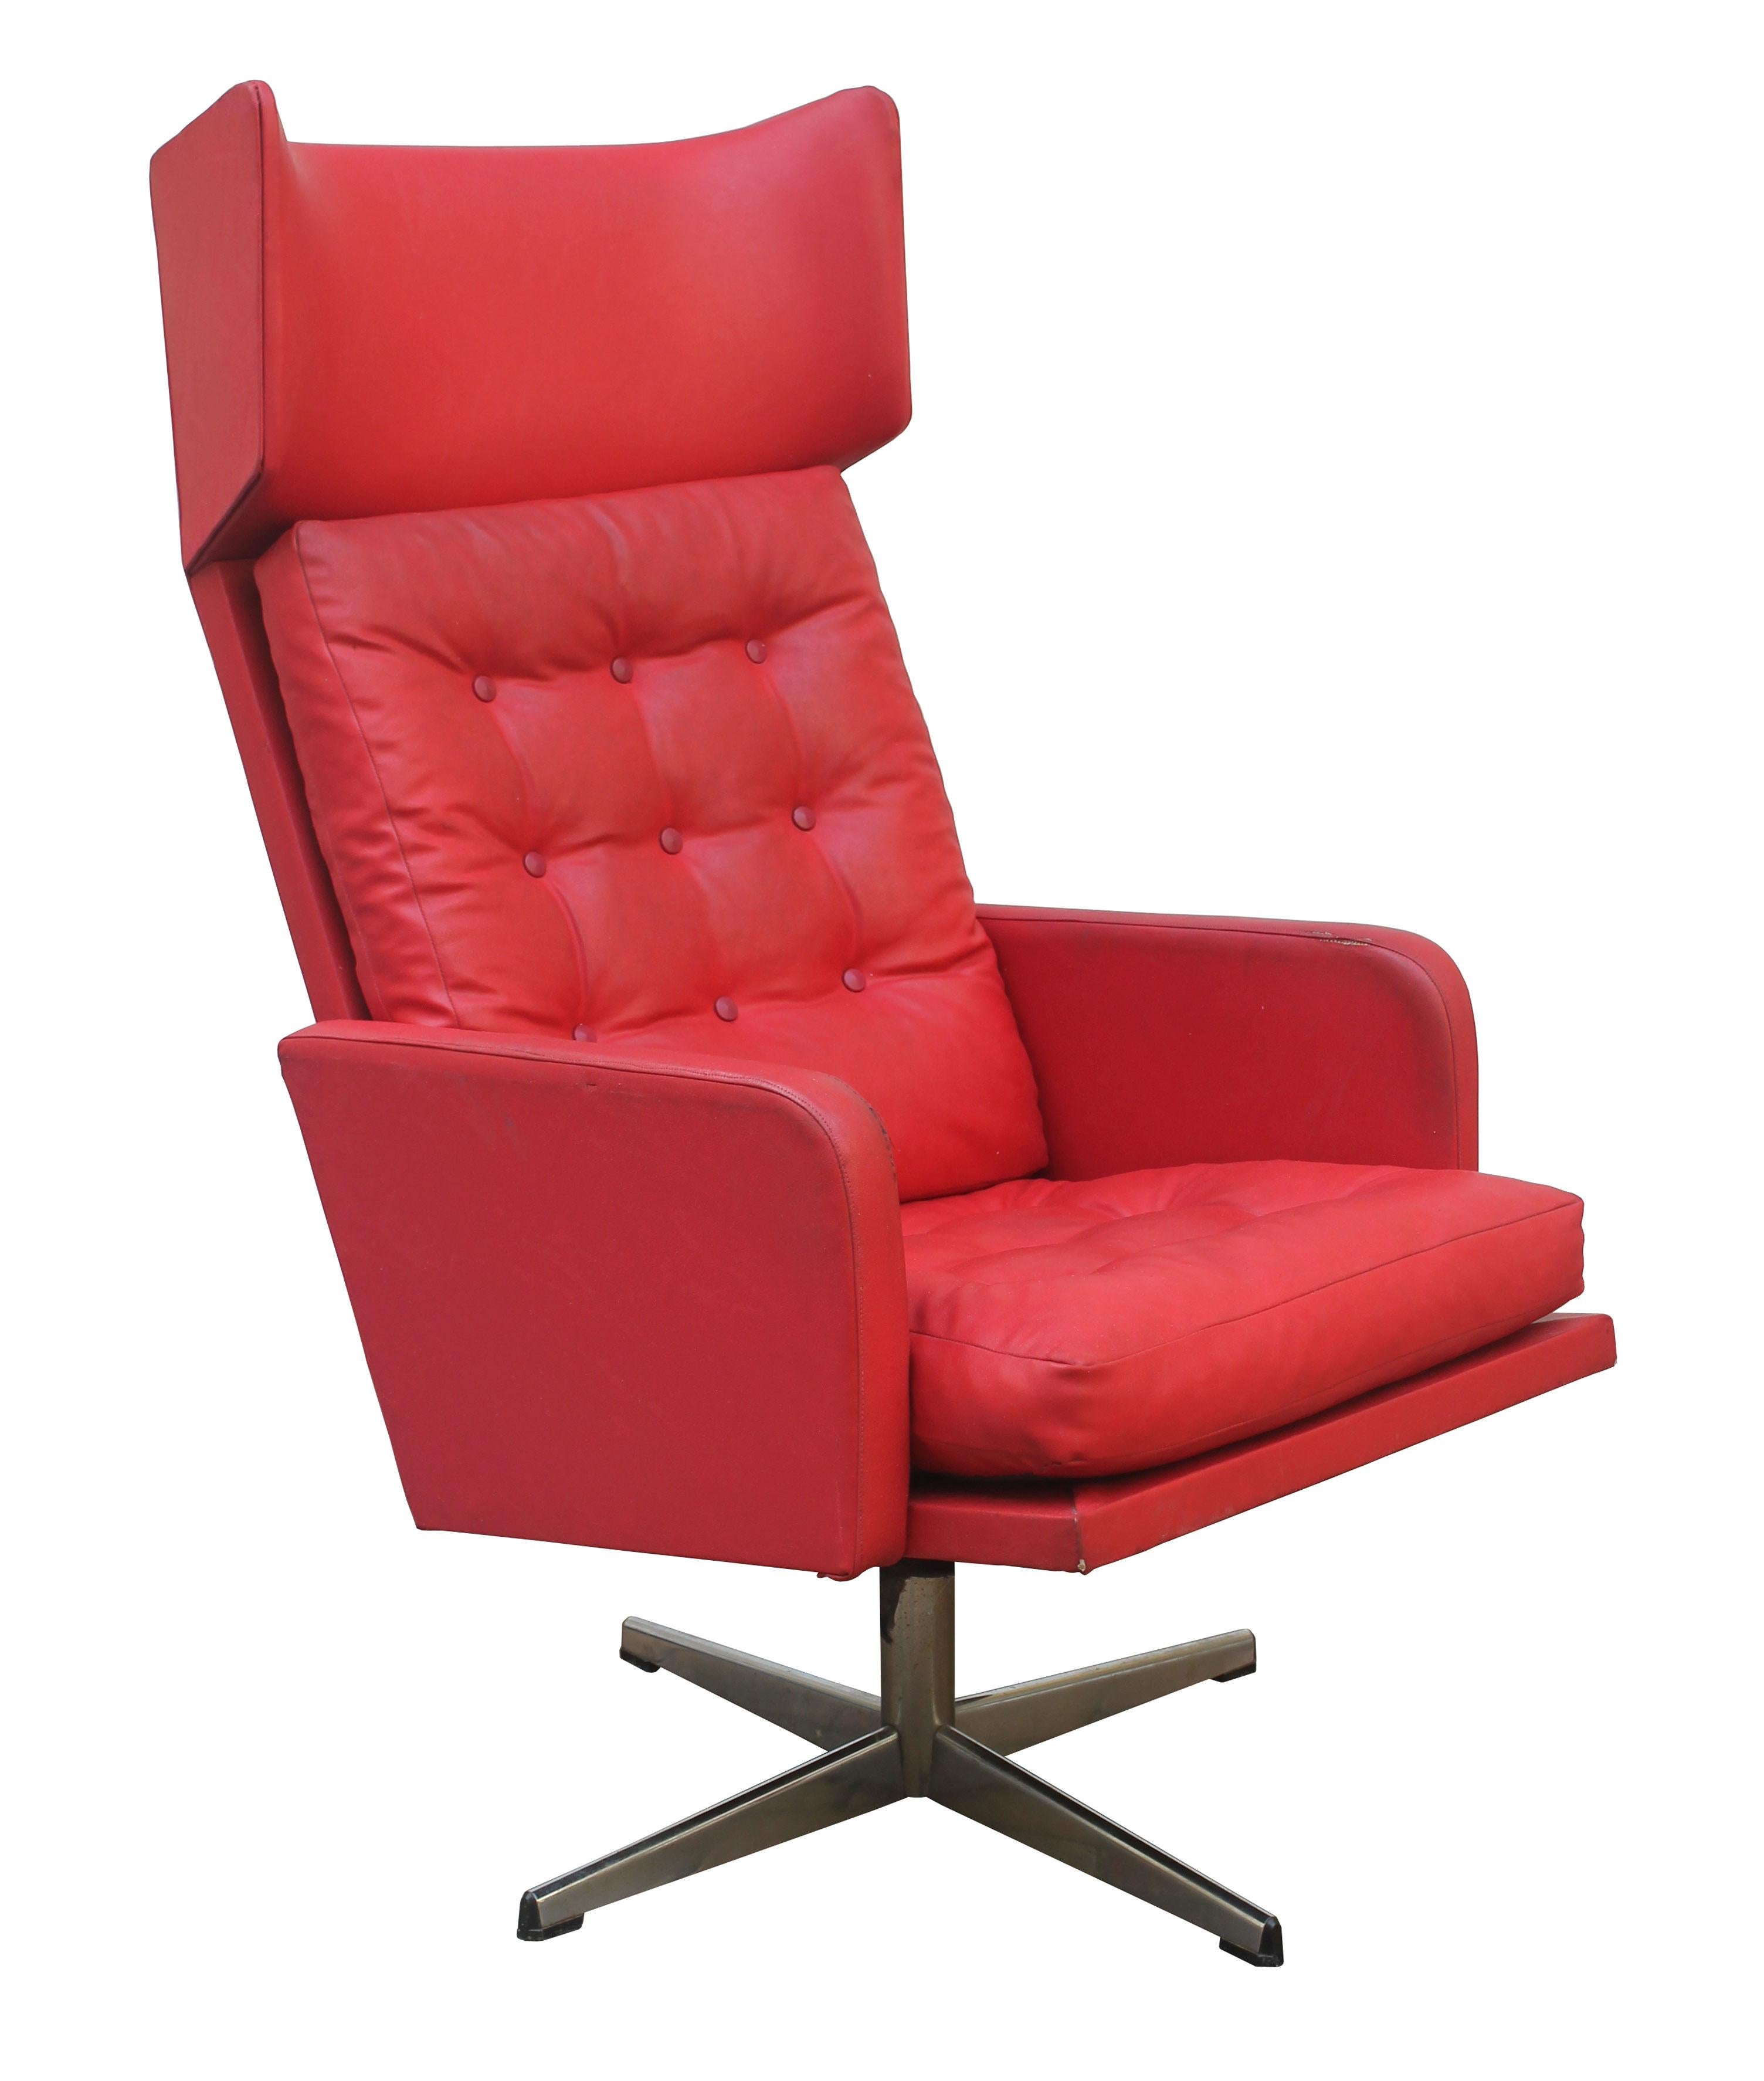 1970s Red Leather Swivel Armchair In Fair Condition For Sale In Brno, CZ